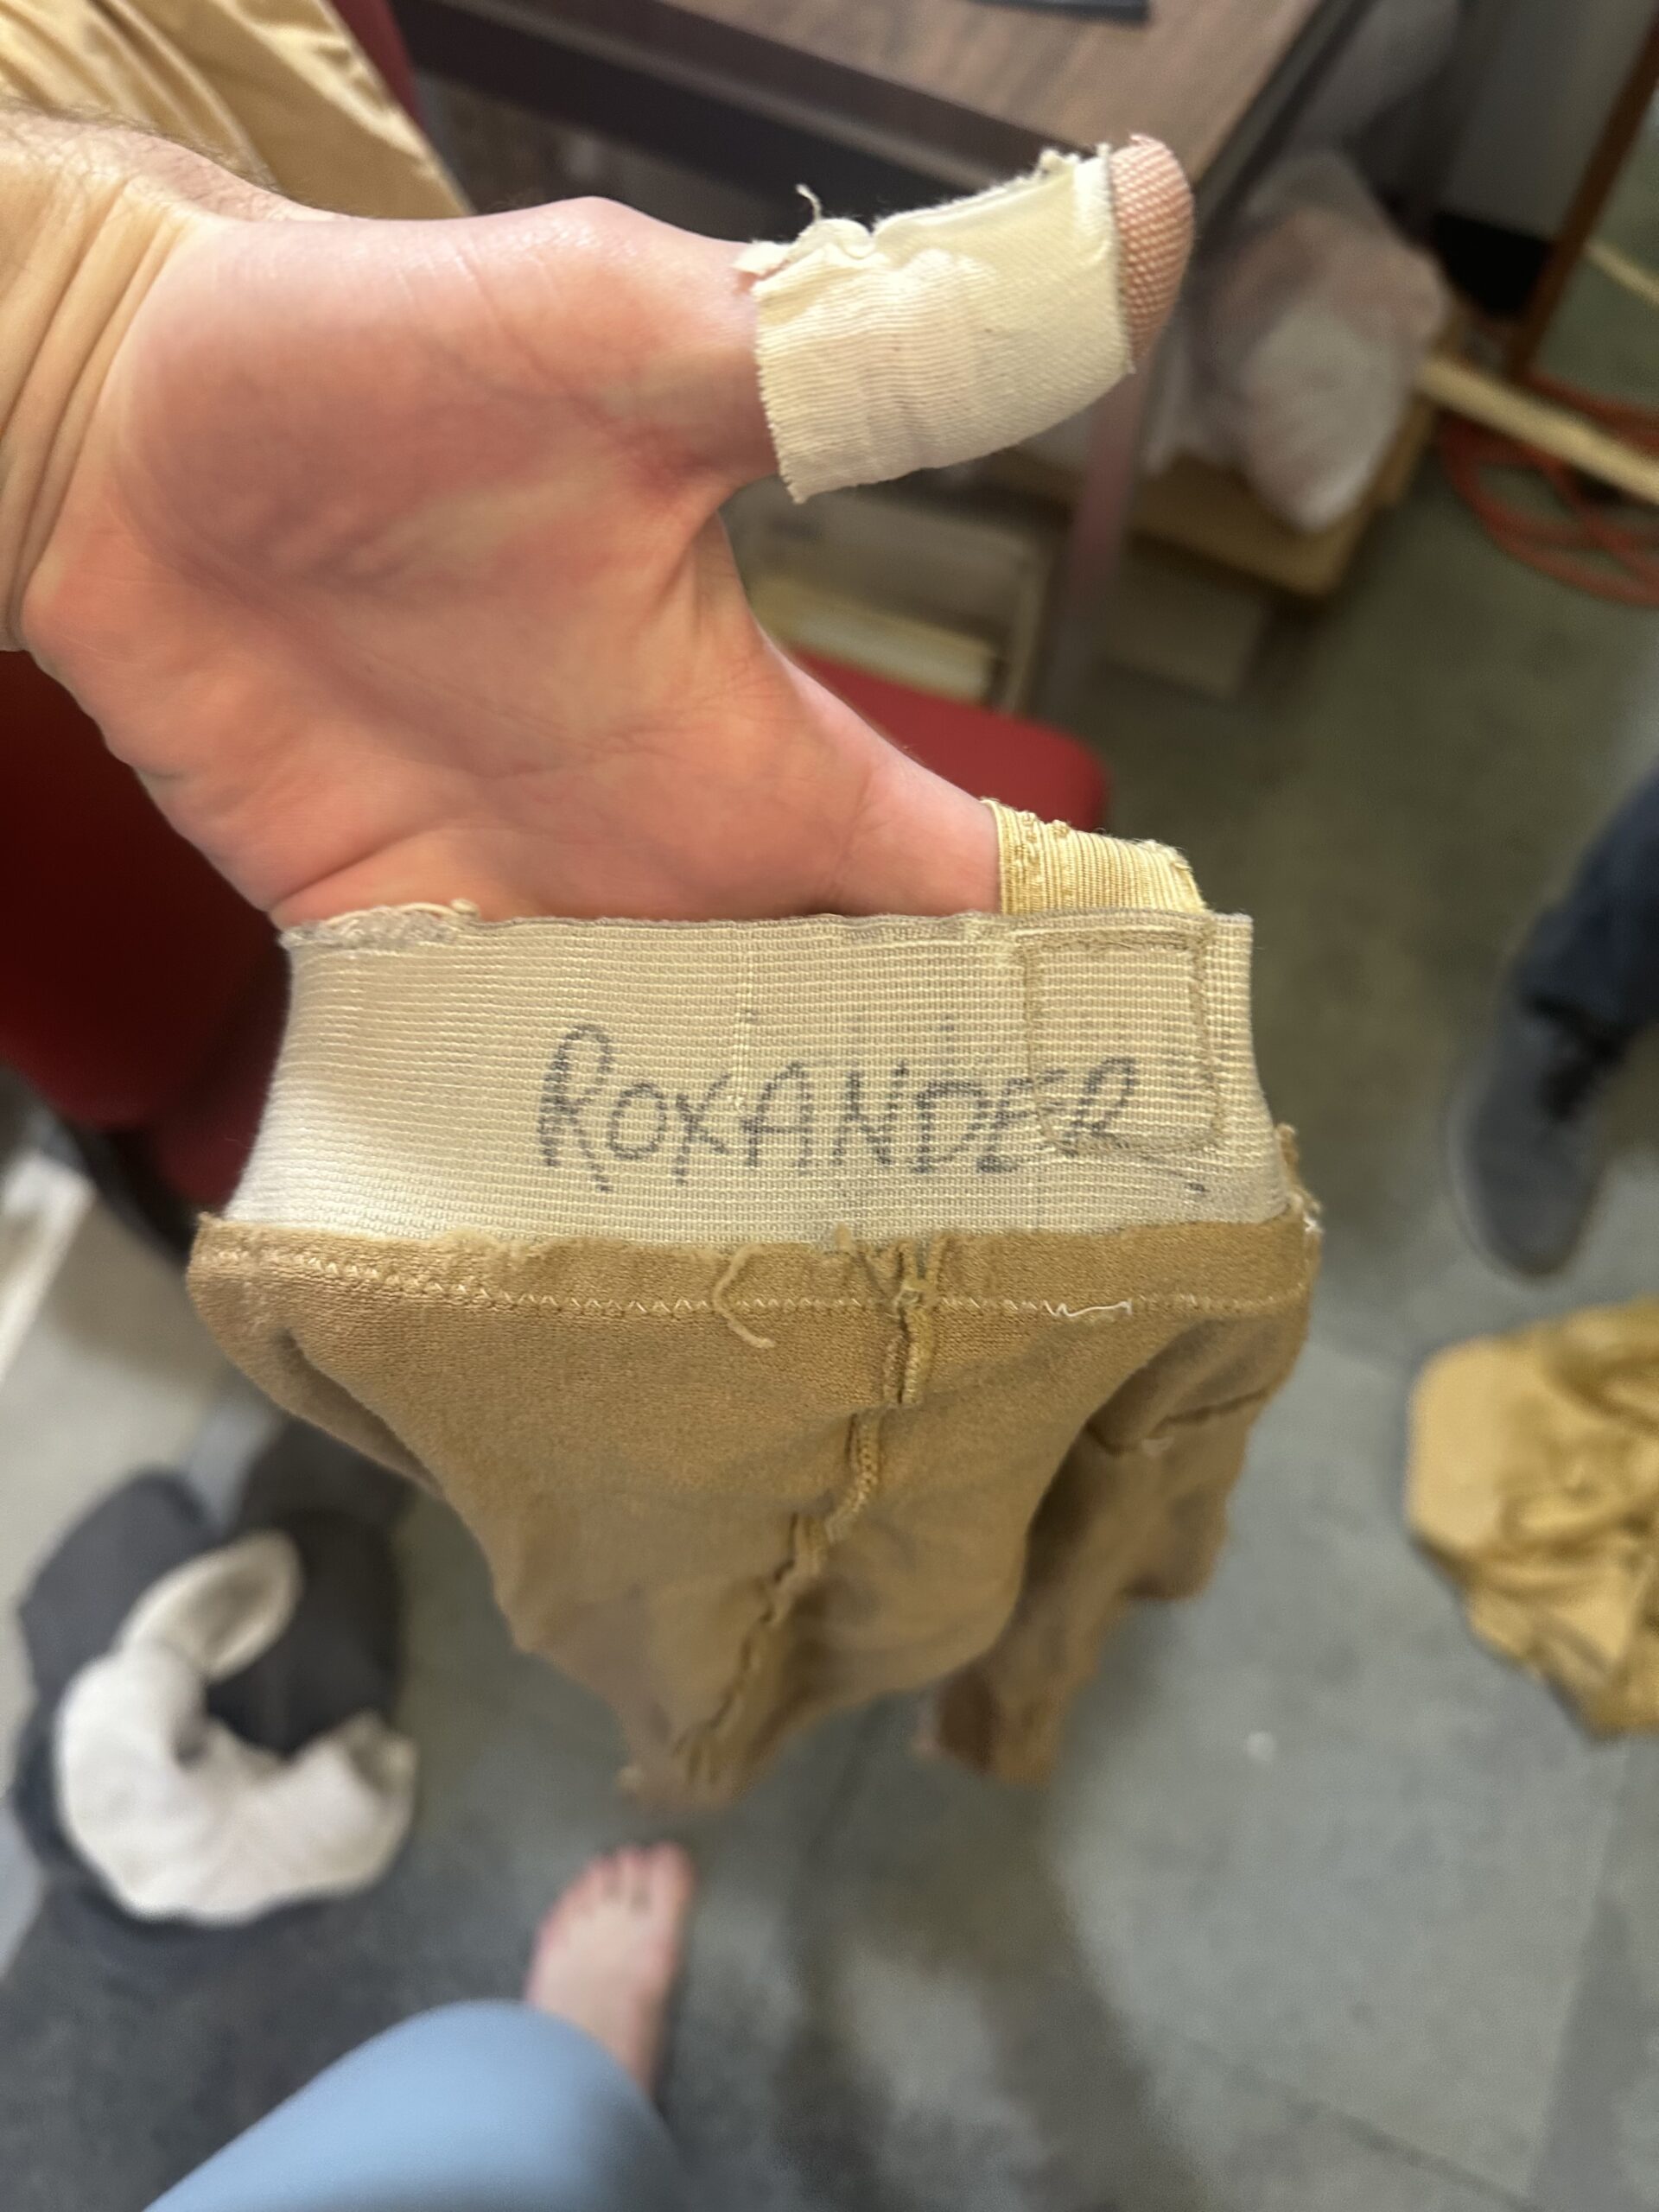 A close-up photo of Ashton Roxander's hand holding a old pair of light brown tights in his hand, the name "Roxander" clearly written in marker on the elastic waistband.